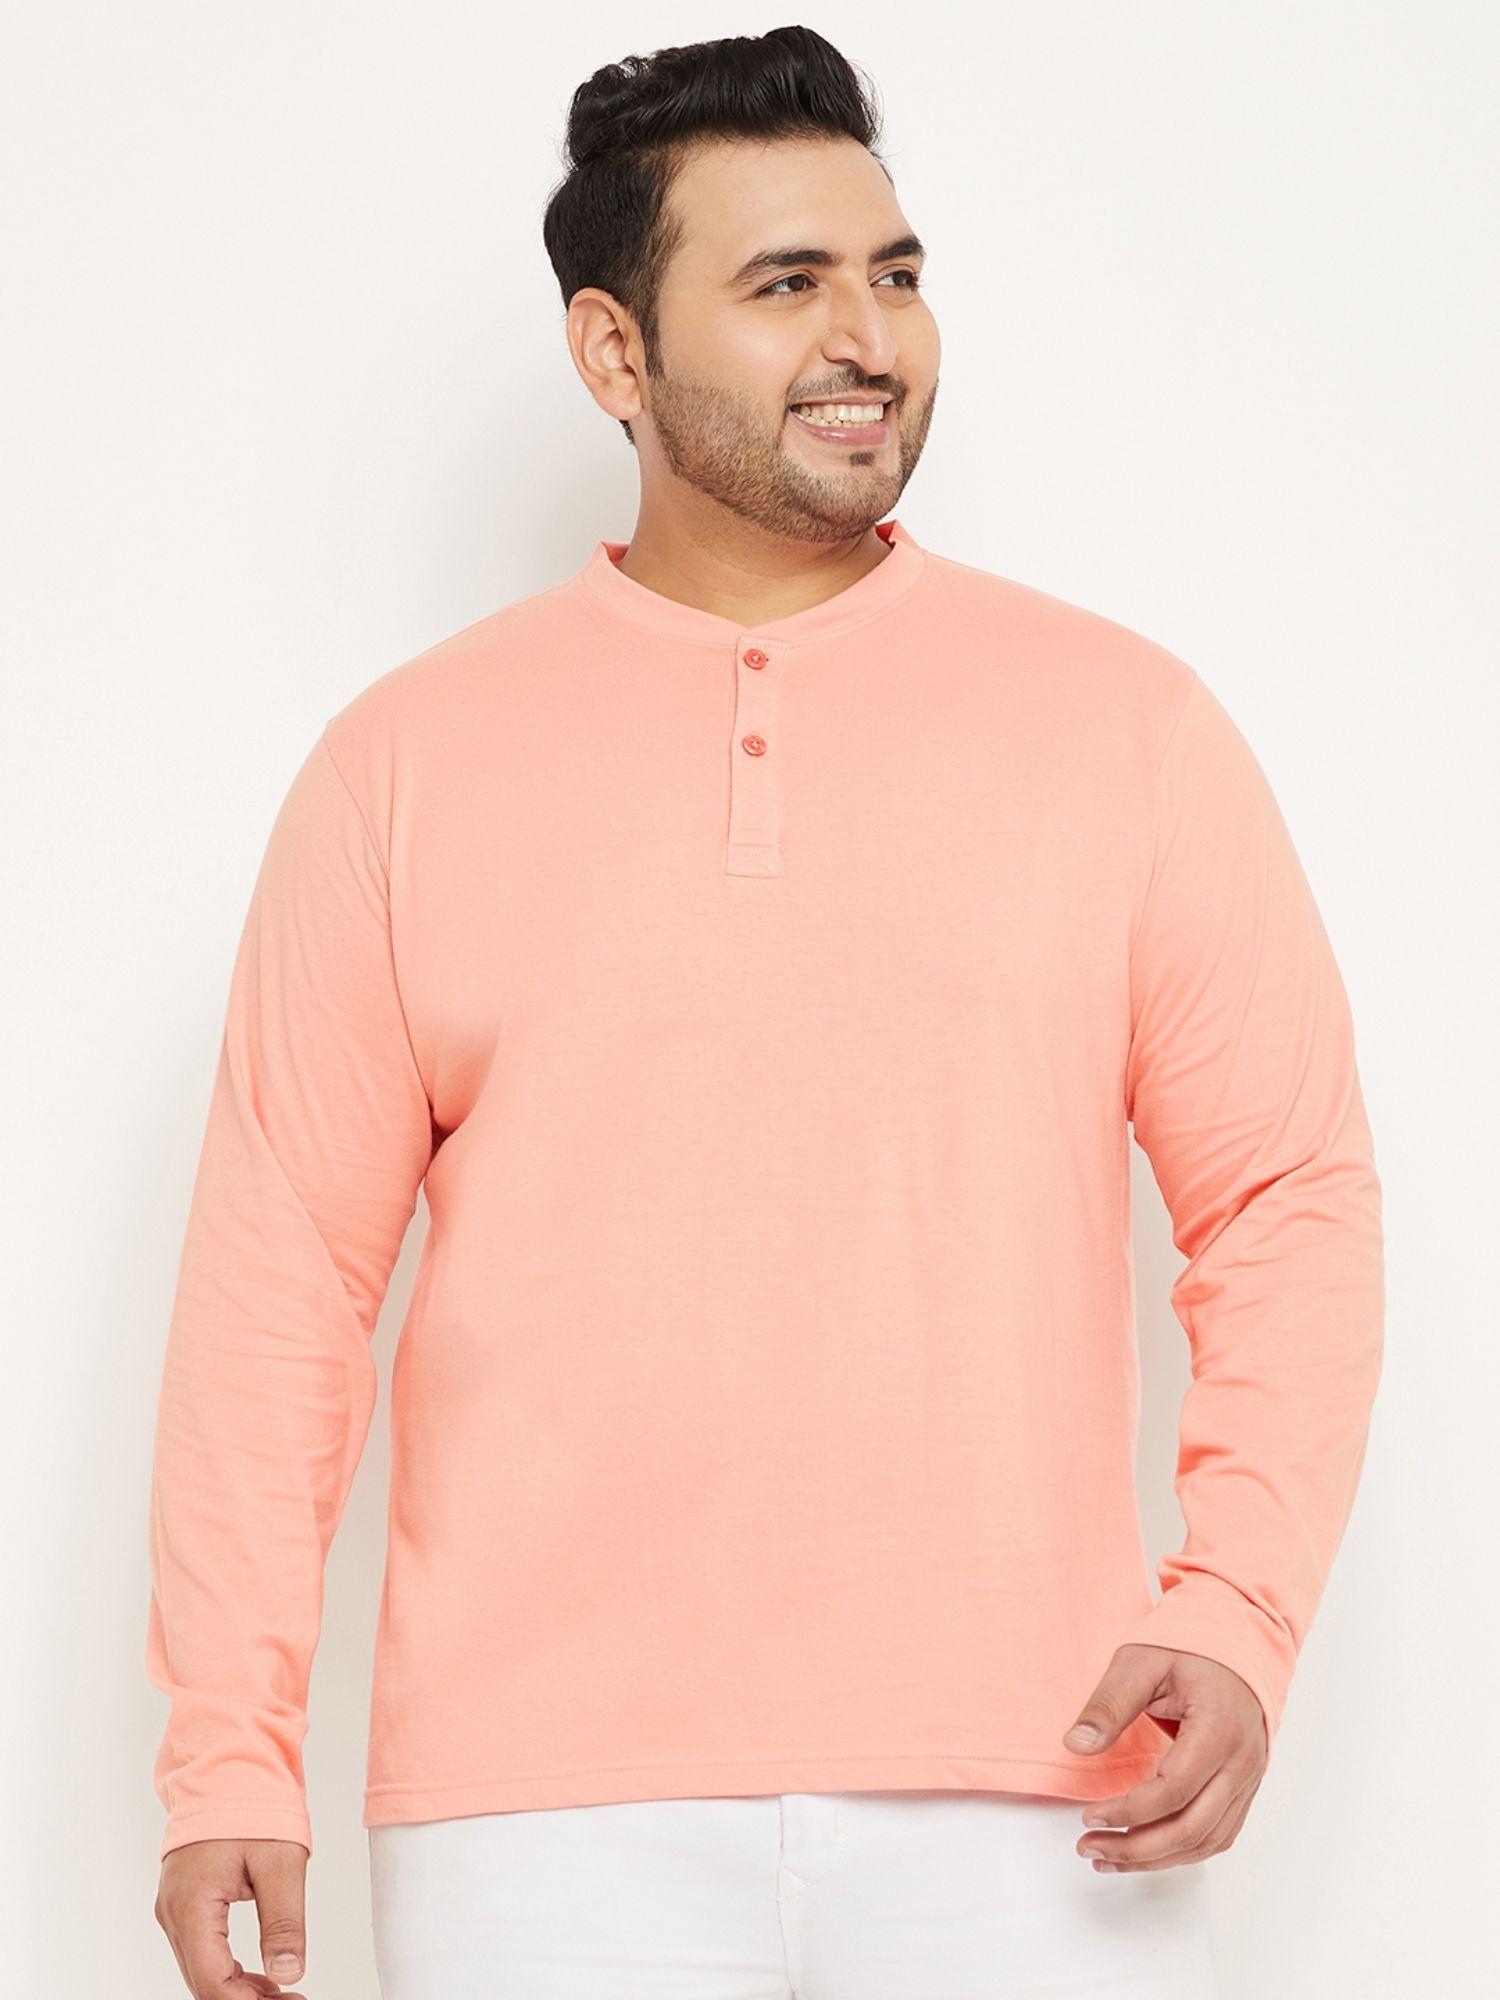 bright peach solid plus size t-shirt